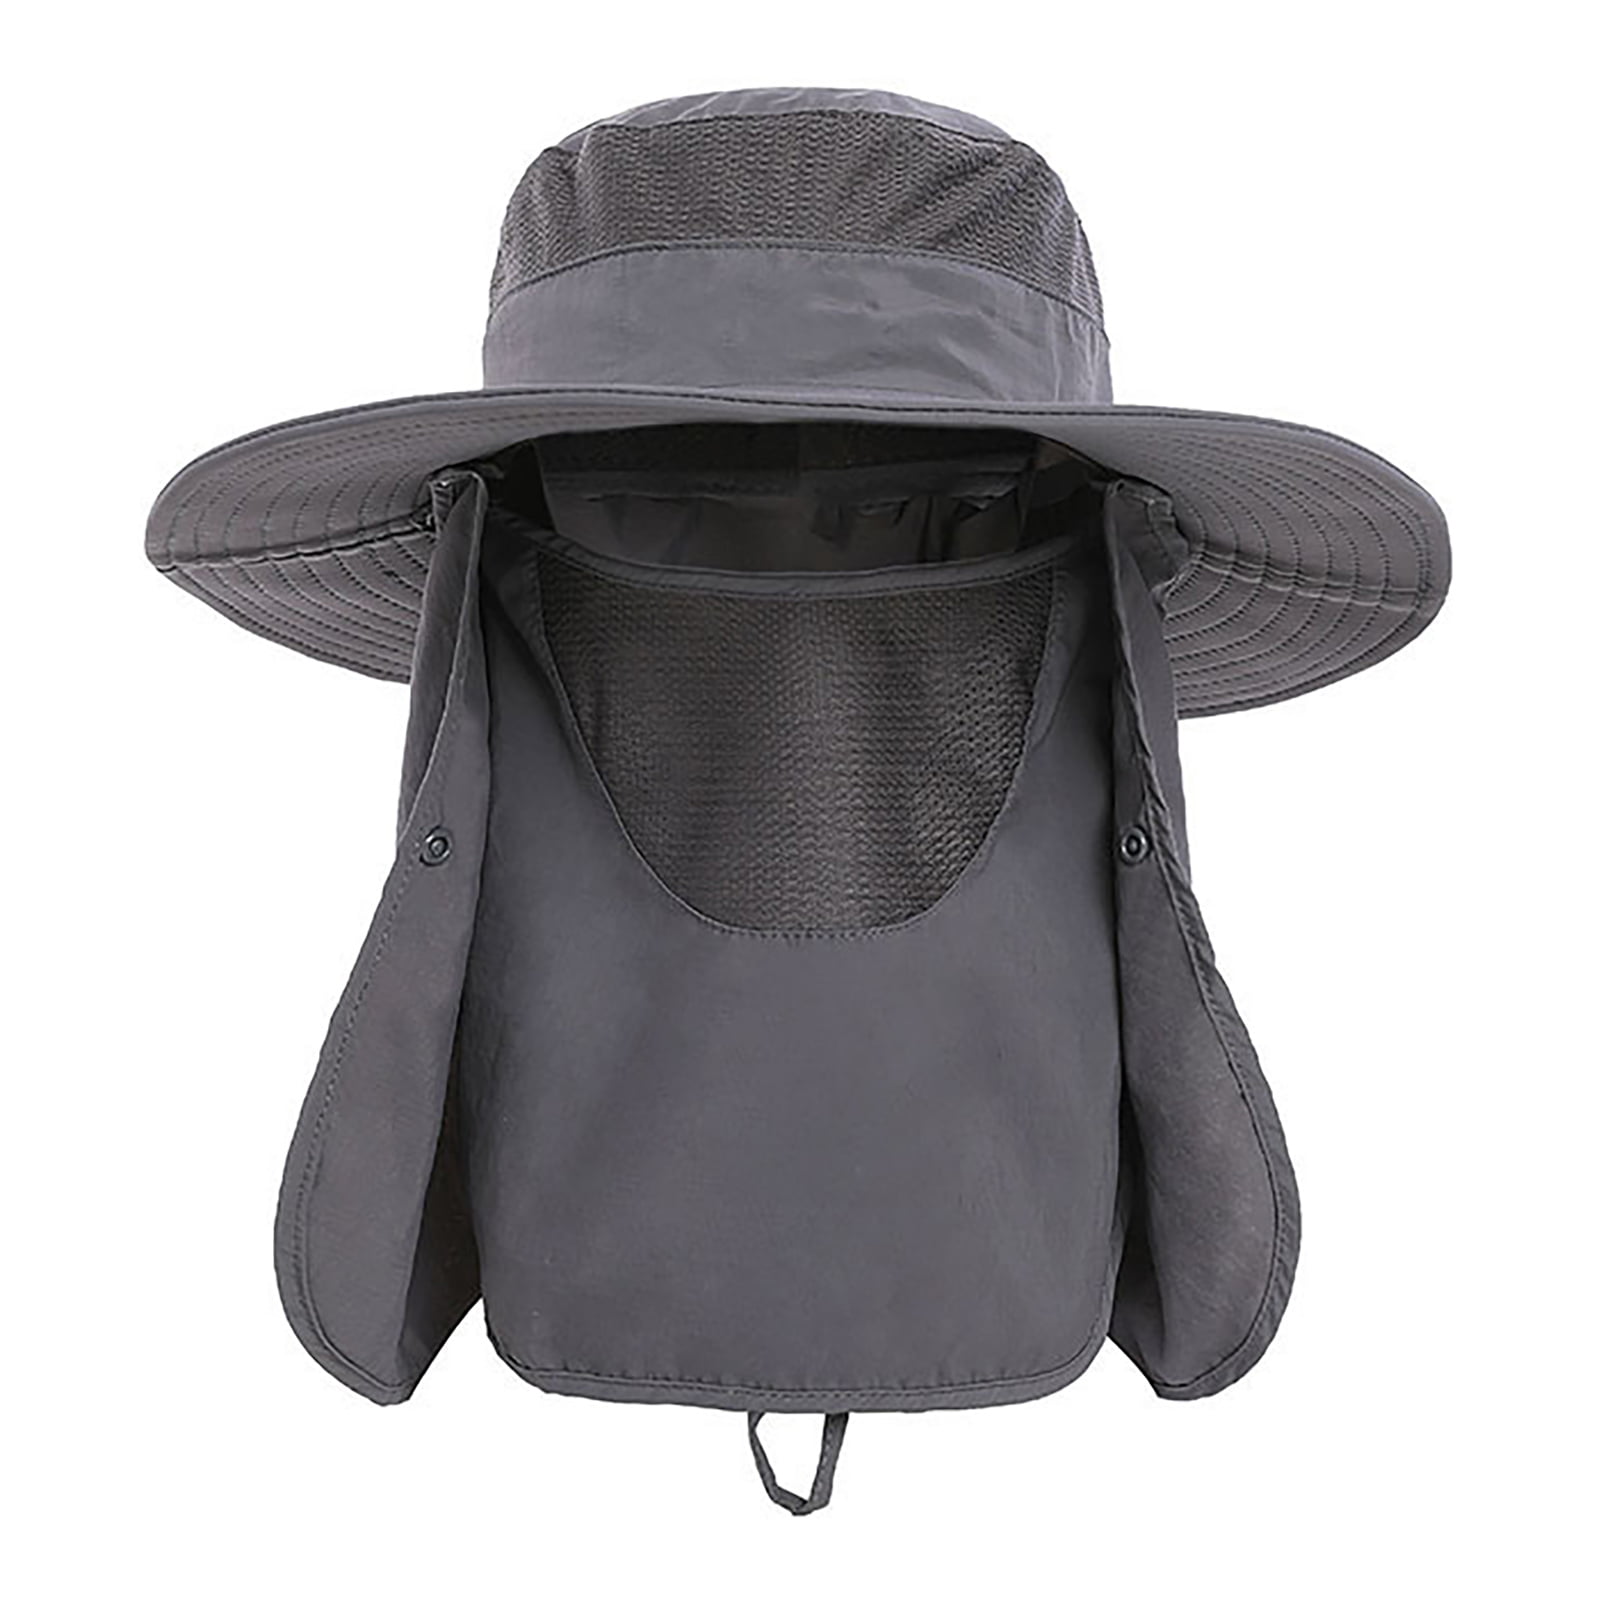 UNIPRIMEBBQ Fishing hat Wide Brim Sun Protection Hat with